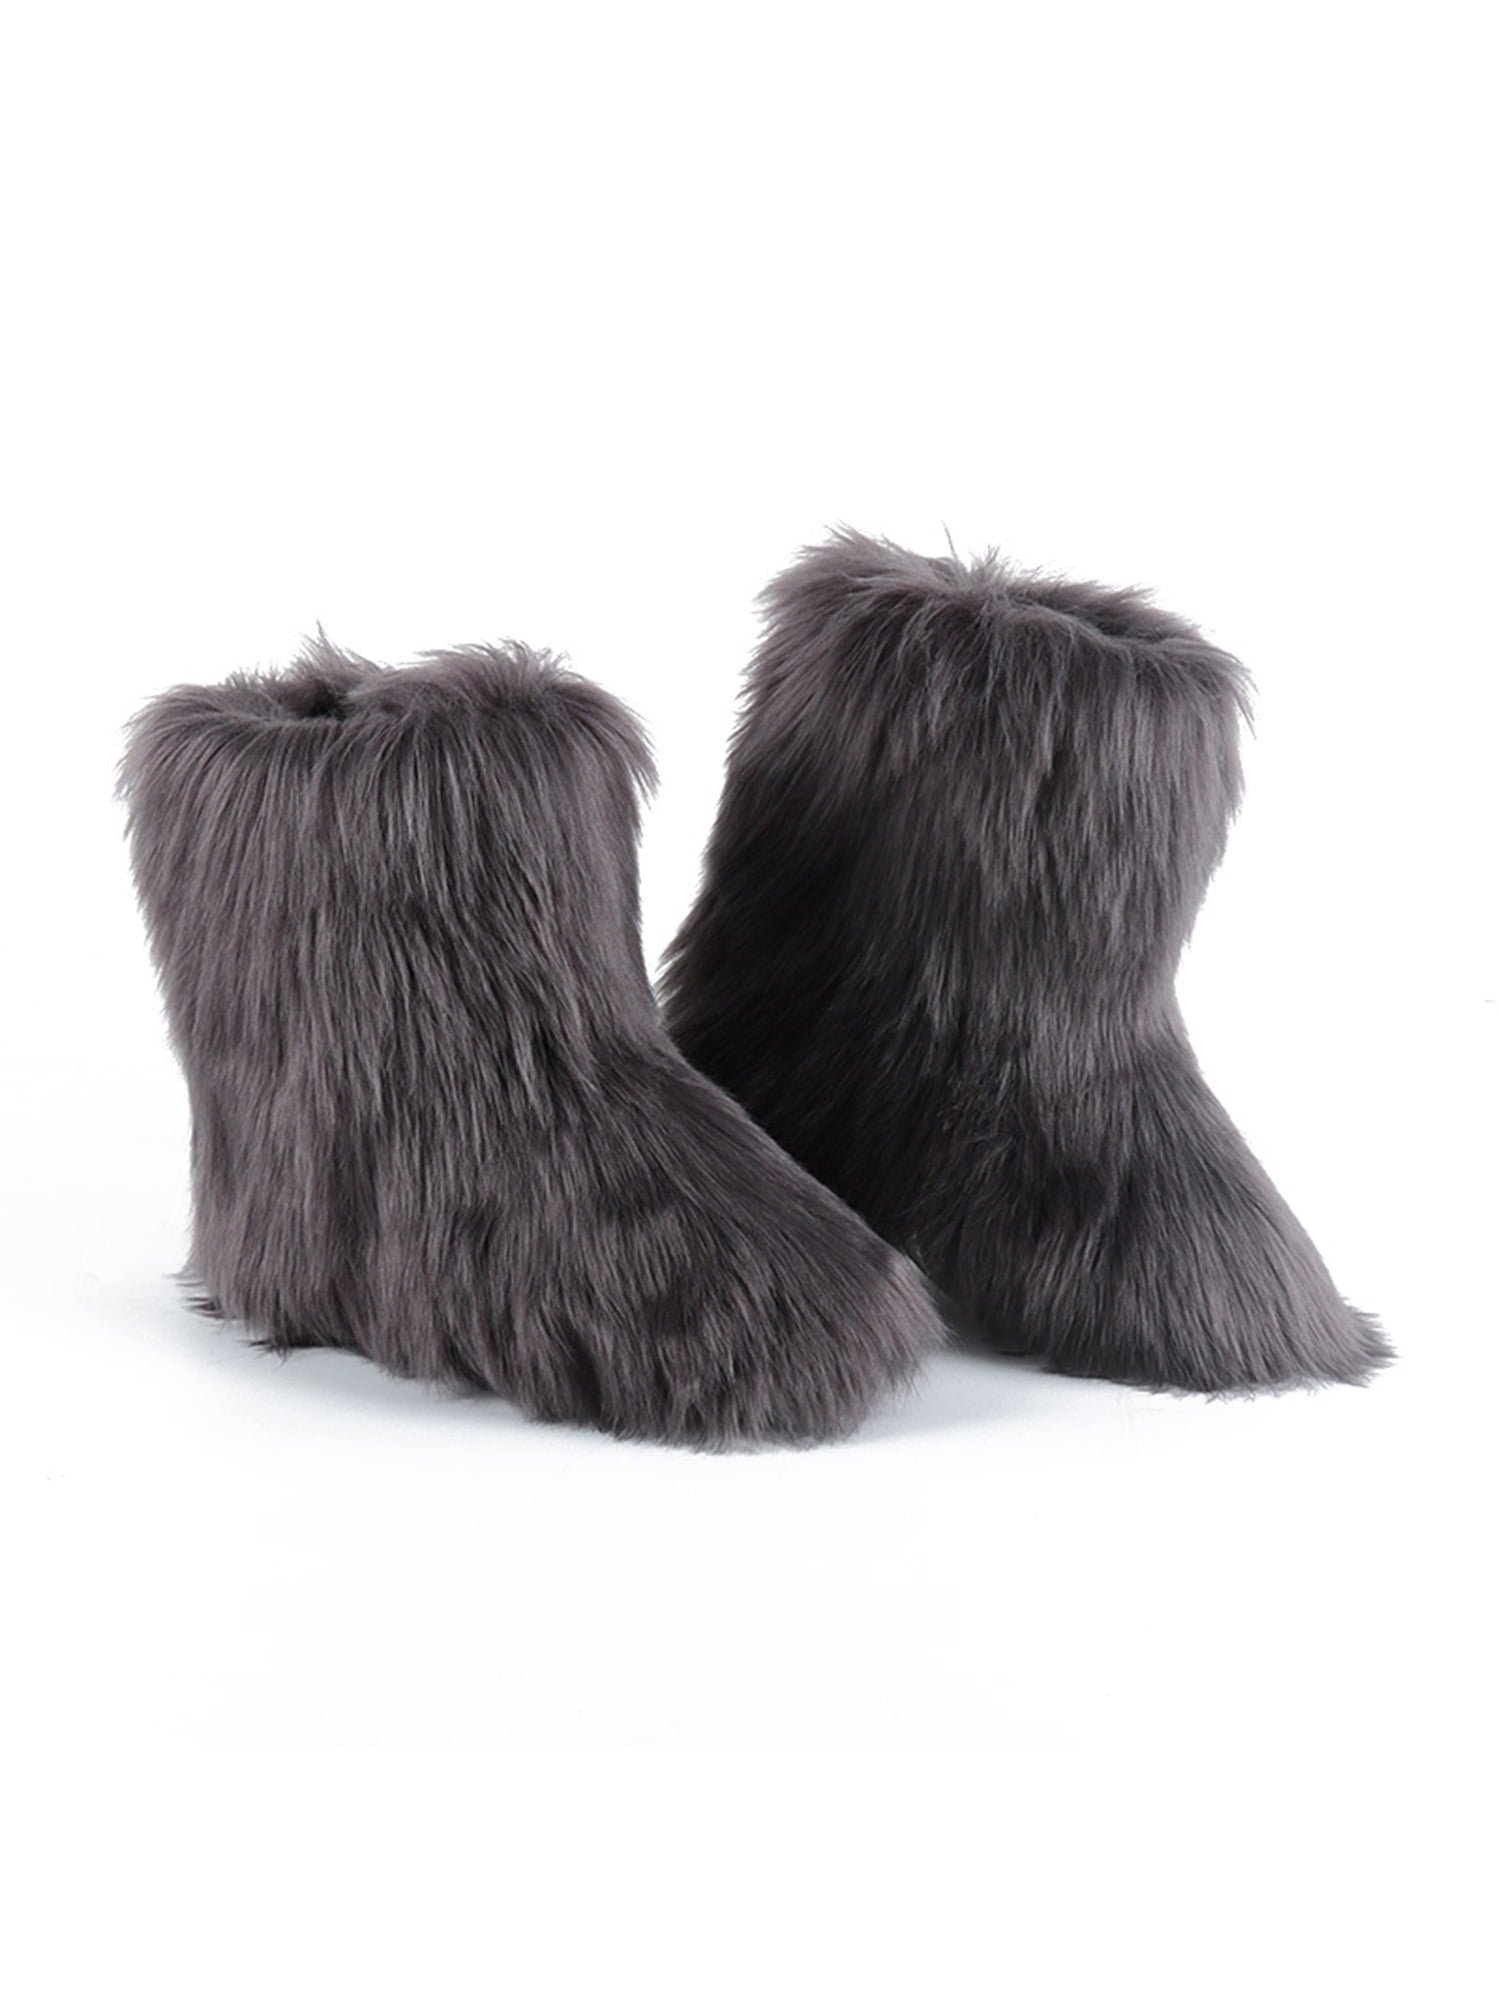 Womens Pull On Furry Flat Fur Boots Snow mid-calf boots Warm casual Shoes 